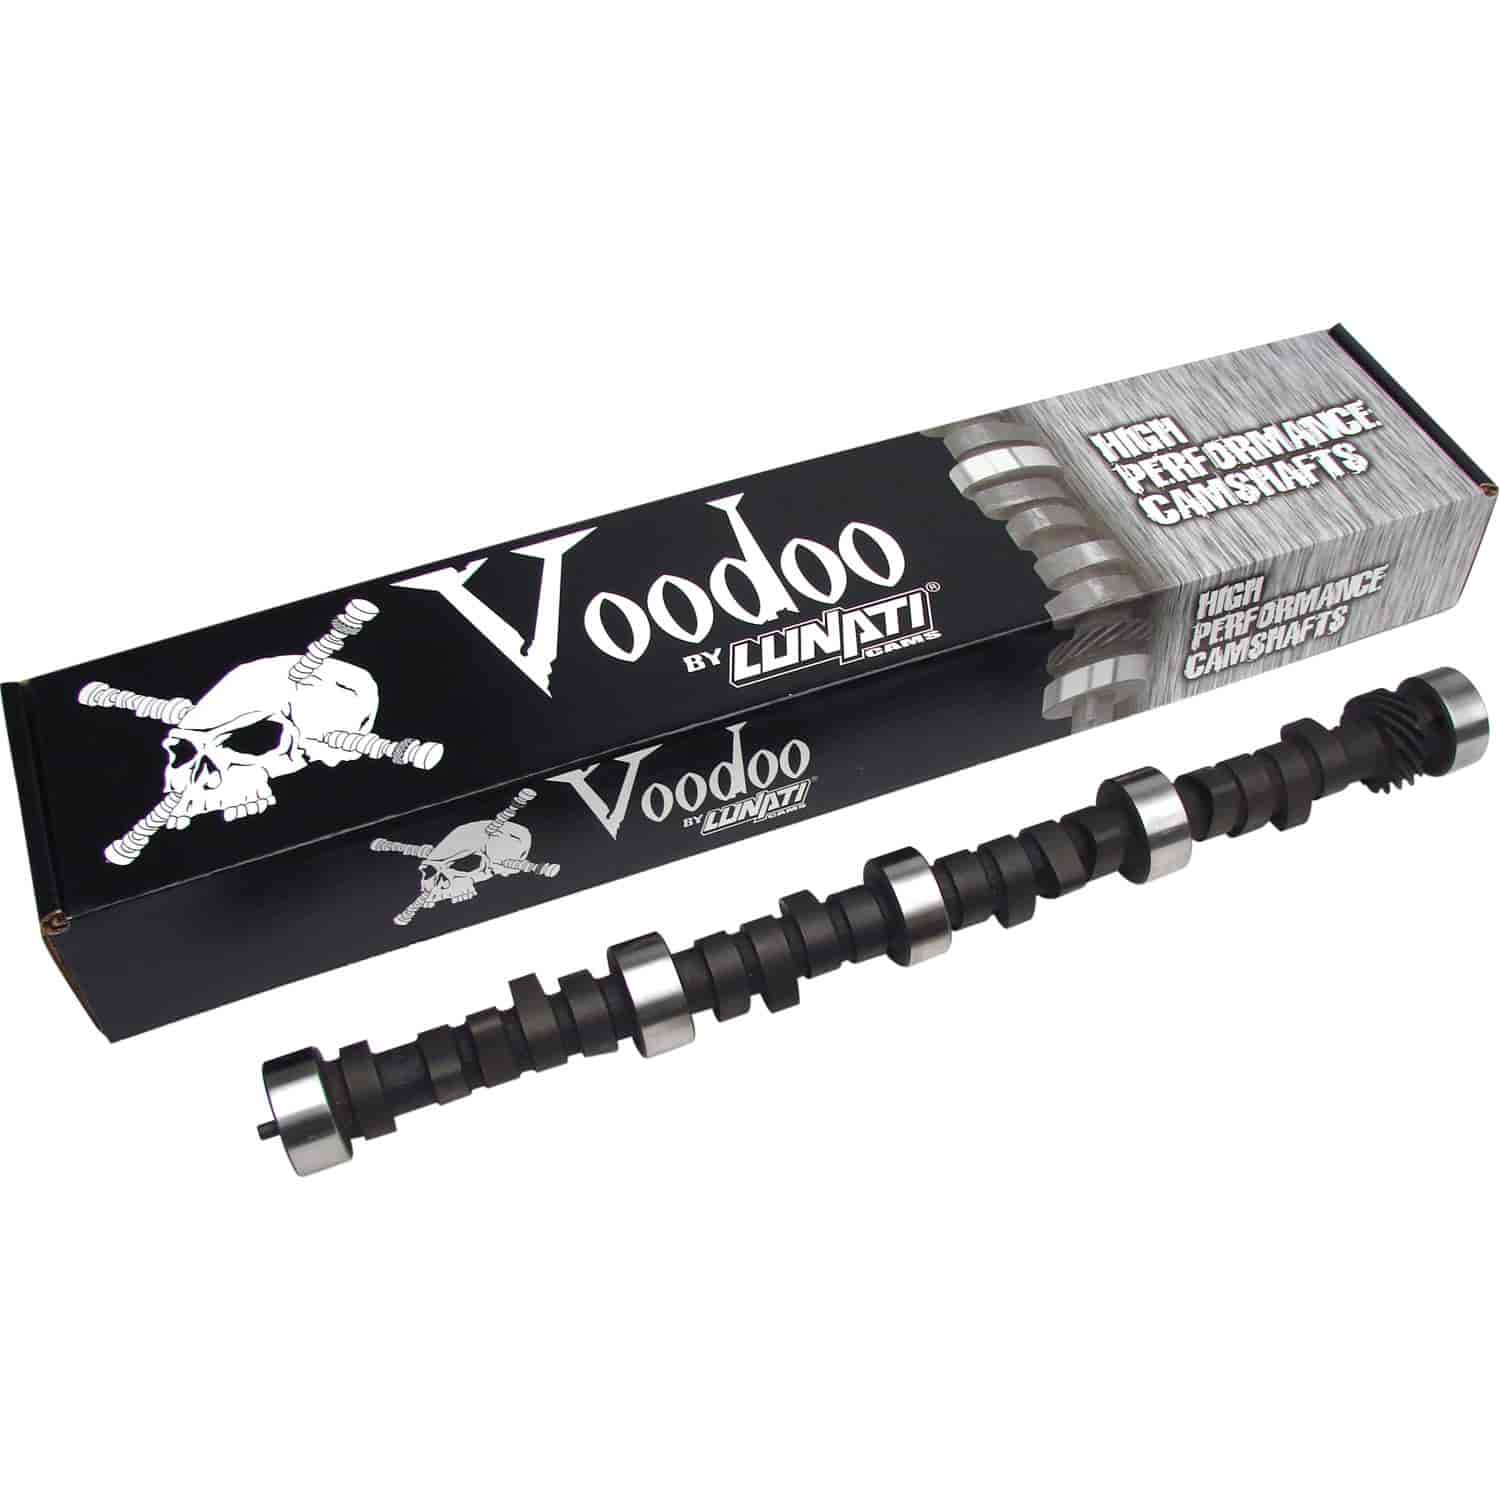 Voodoo Hydraulic Flat Tappet Camshaft Chevy V6 4.3L